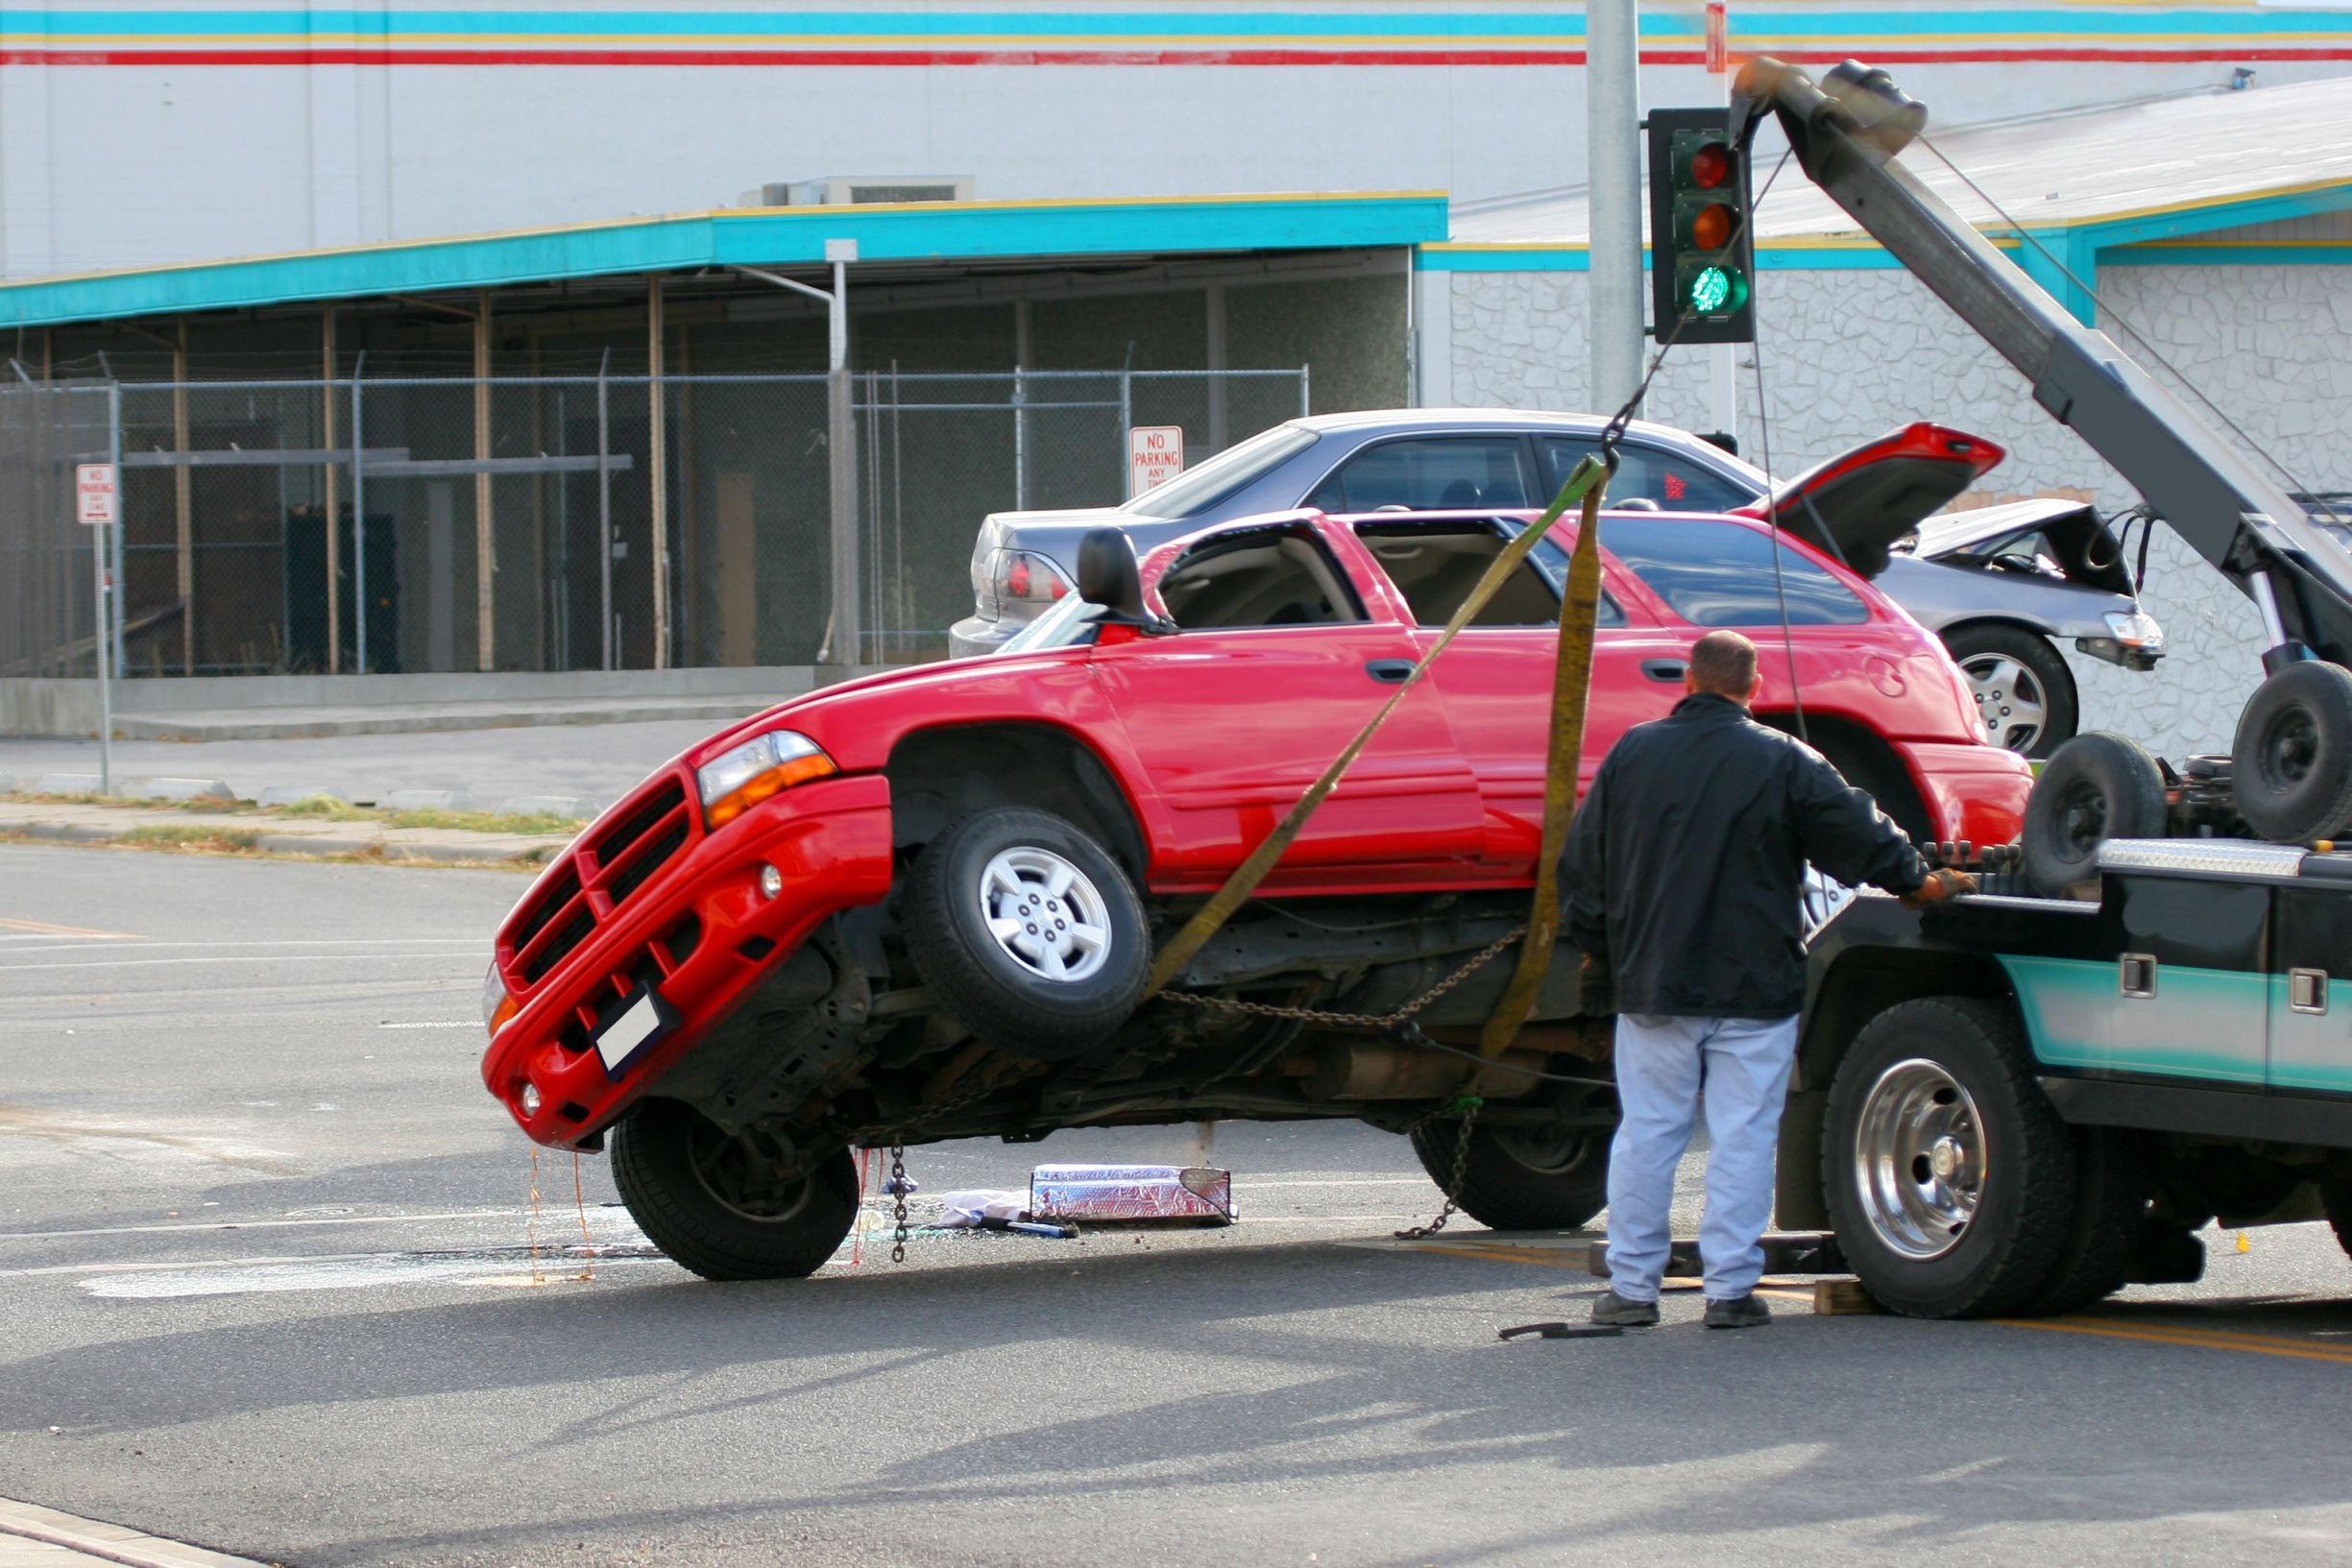 Find a Towing Company in Hattiesburg That Offers Affordable Prices